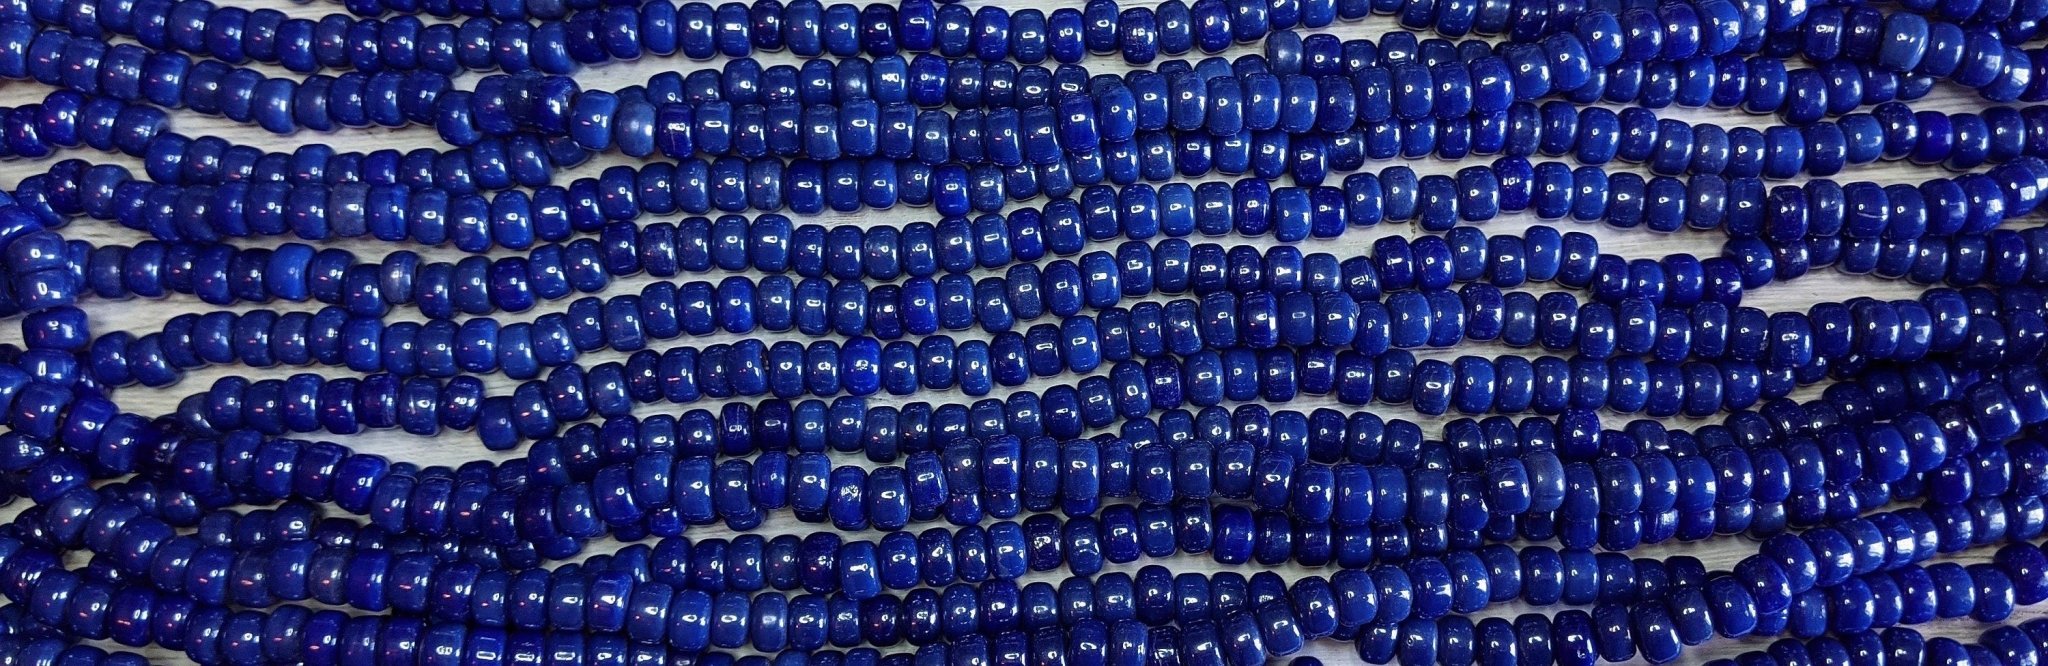 Opaque Dark Blue Luster - Size 9x6mm (3mm hole) Recycled Glass Crow Beads - 24 Inch Strand (ICB19) - Beads and Babble